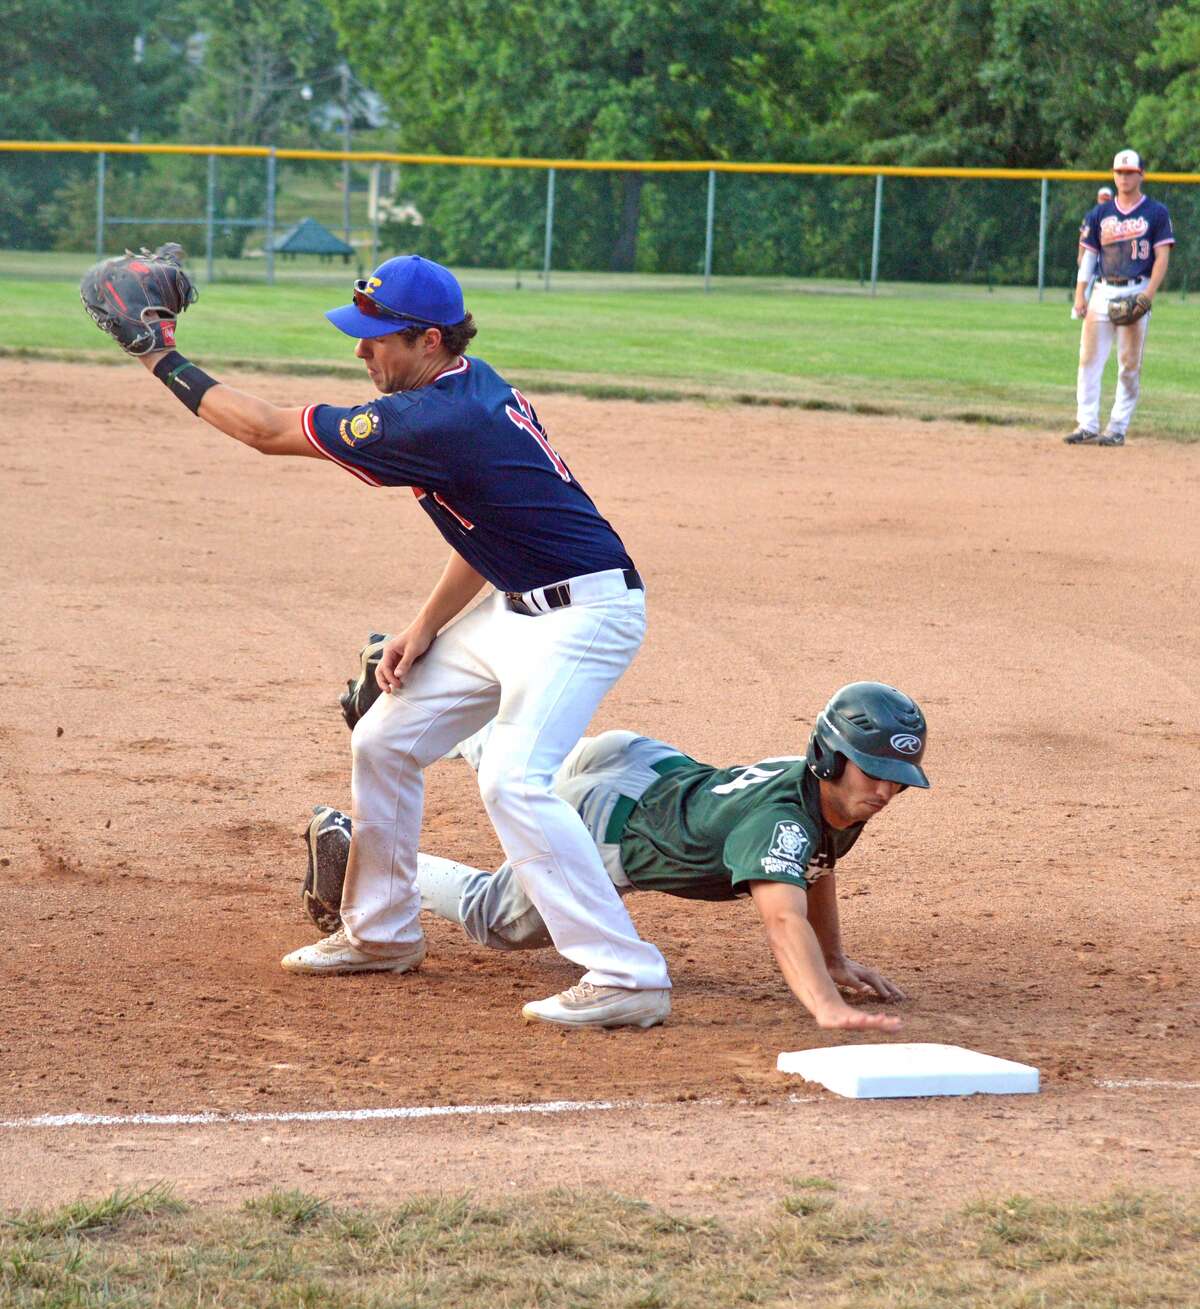 Bears first baseman Cole Hansel, left, takes a throw on an attempted pickoff in the second inning.